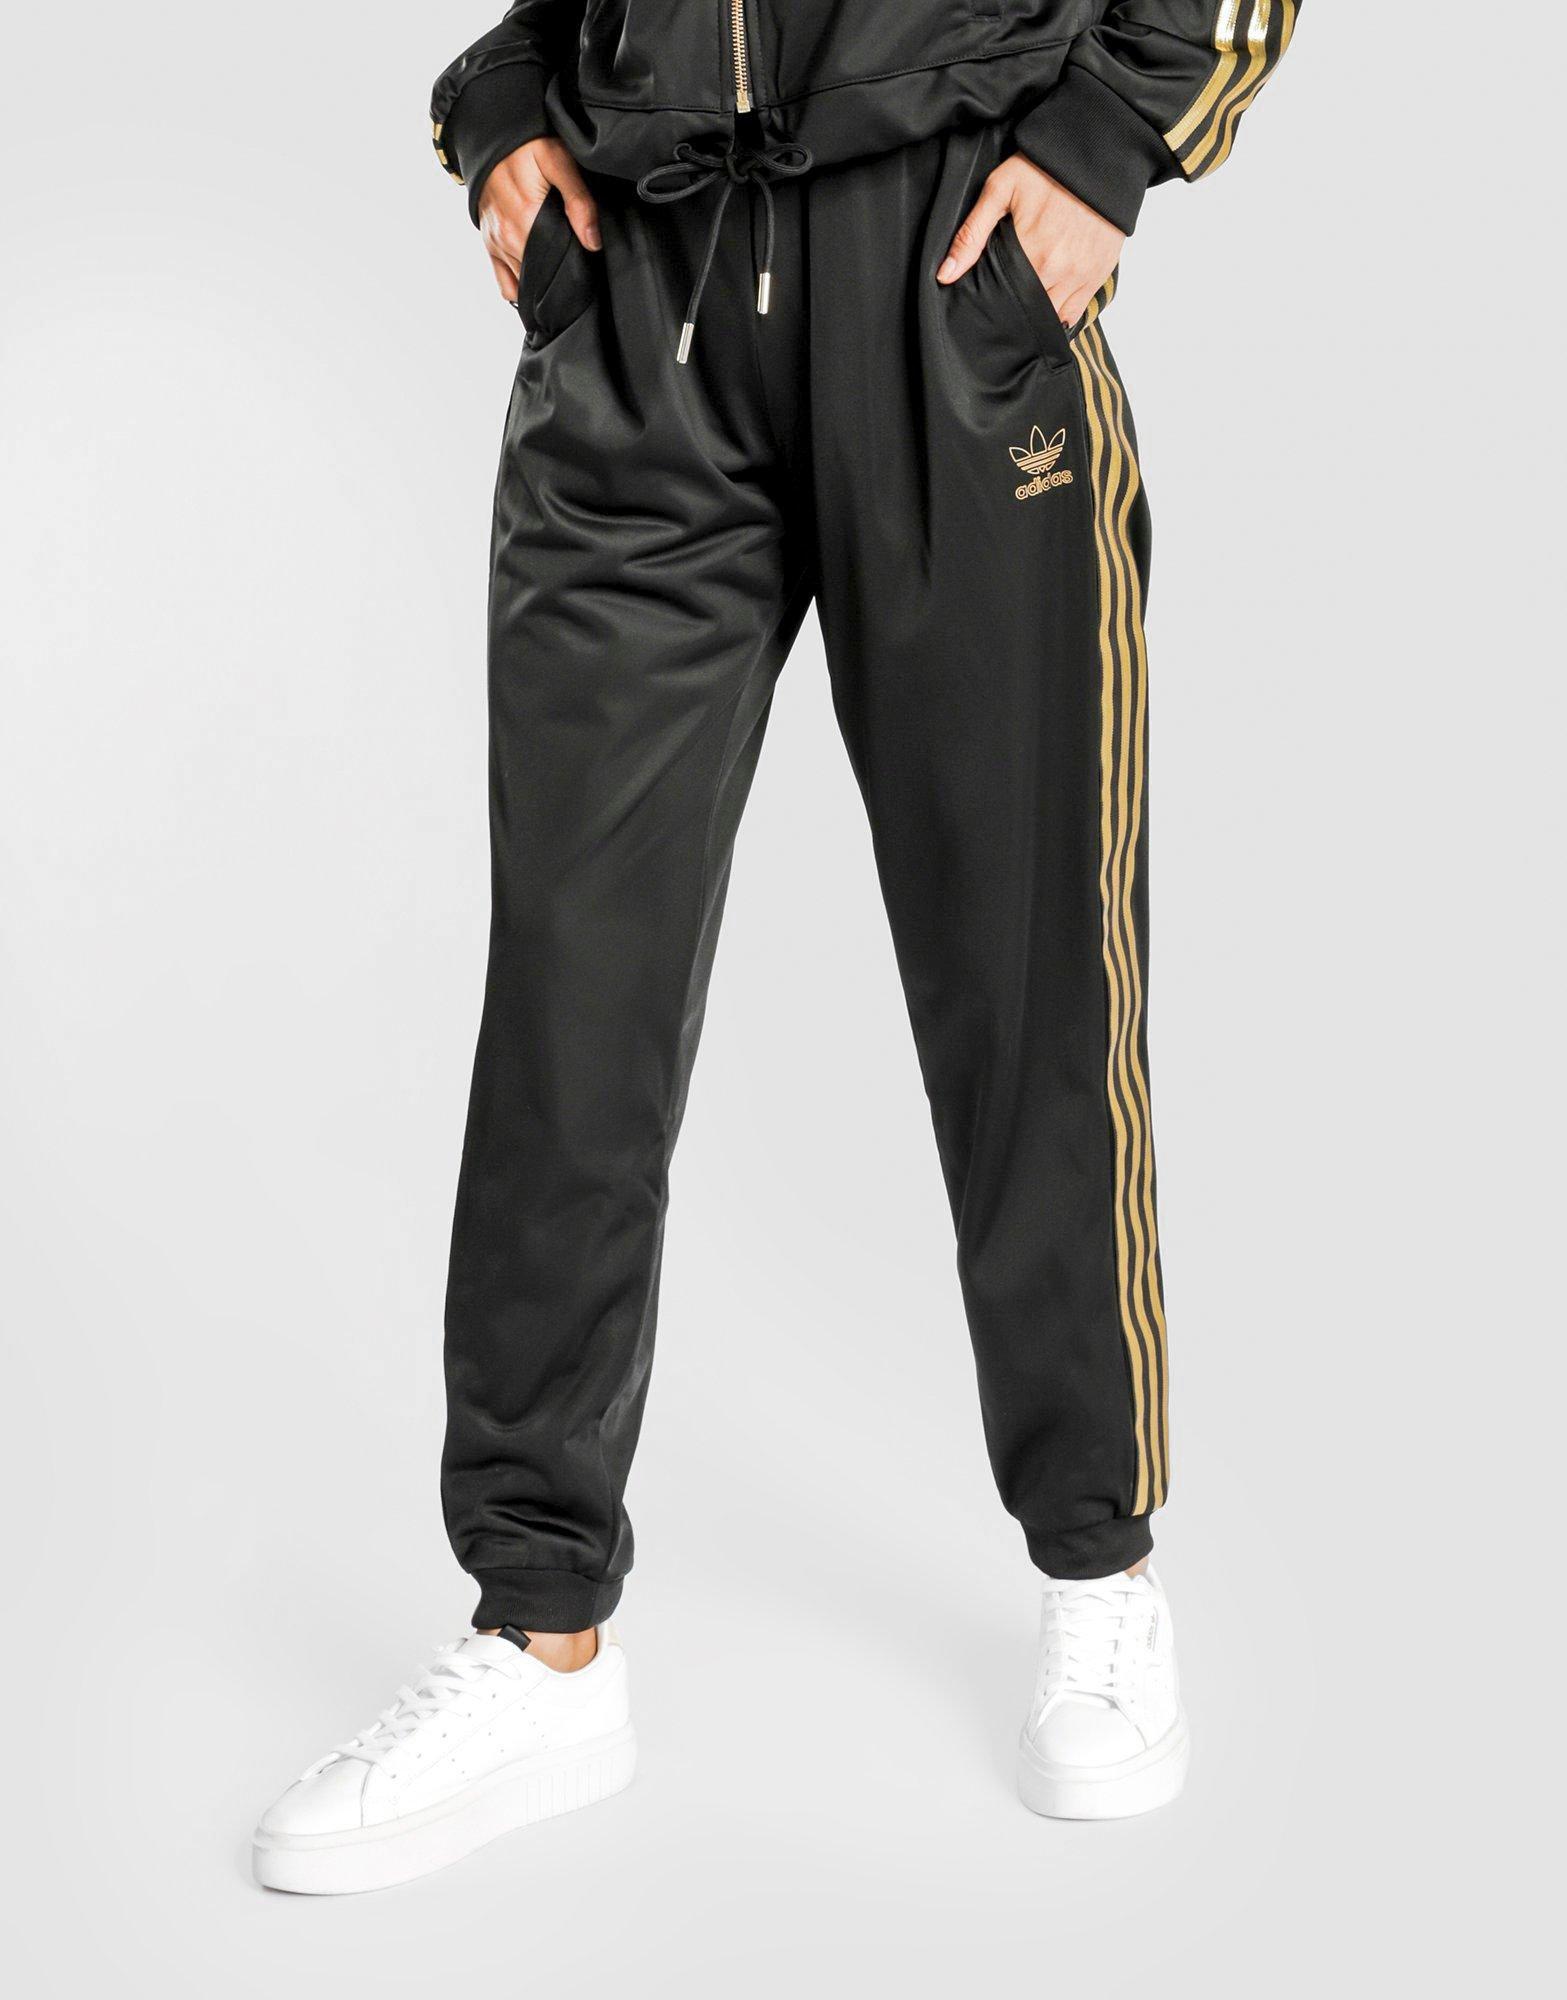 zoo sst track suit